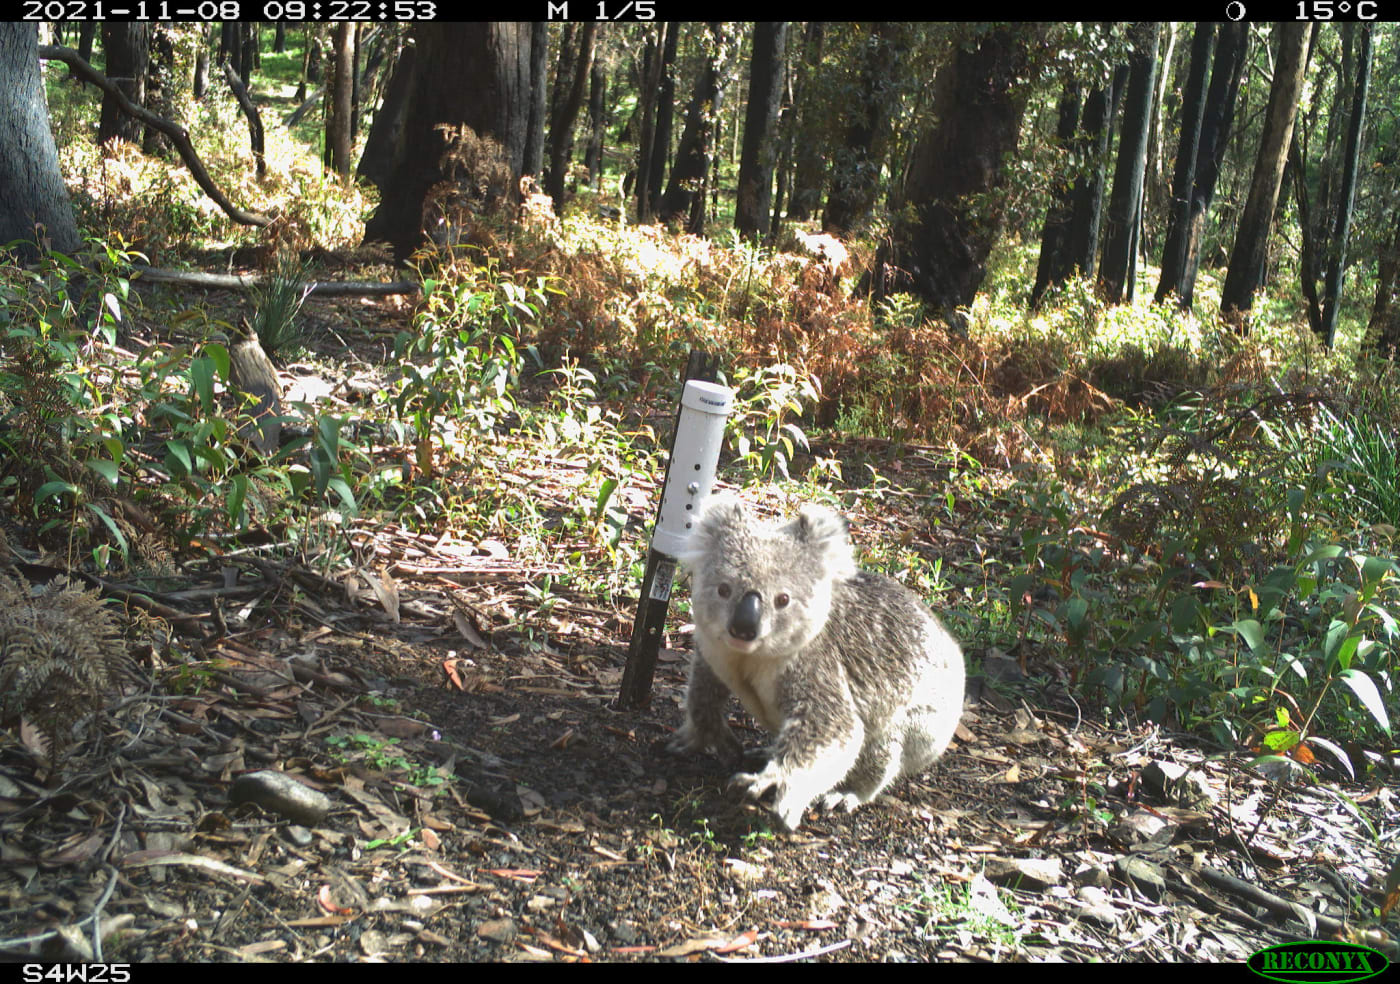 A sensor camera photo of a young koala in the NSW Blue Mountains, taken as part of the Eyes on Recovery project.

Eyes on Recovery is a large-scale sensor camera project. and a collaboration between WWF, Conservation International, and local land managers and research organisations. Google-powered AI technology has been trained to identify Australian animals in photos to track the recovery of threatened species following the 2019-20 bushfires.